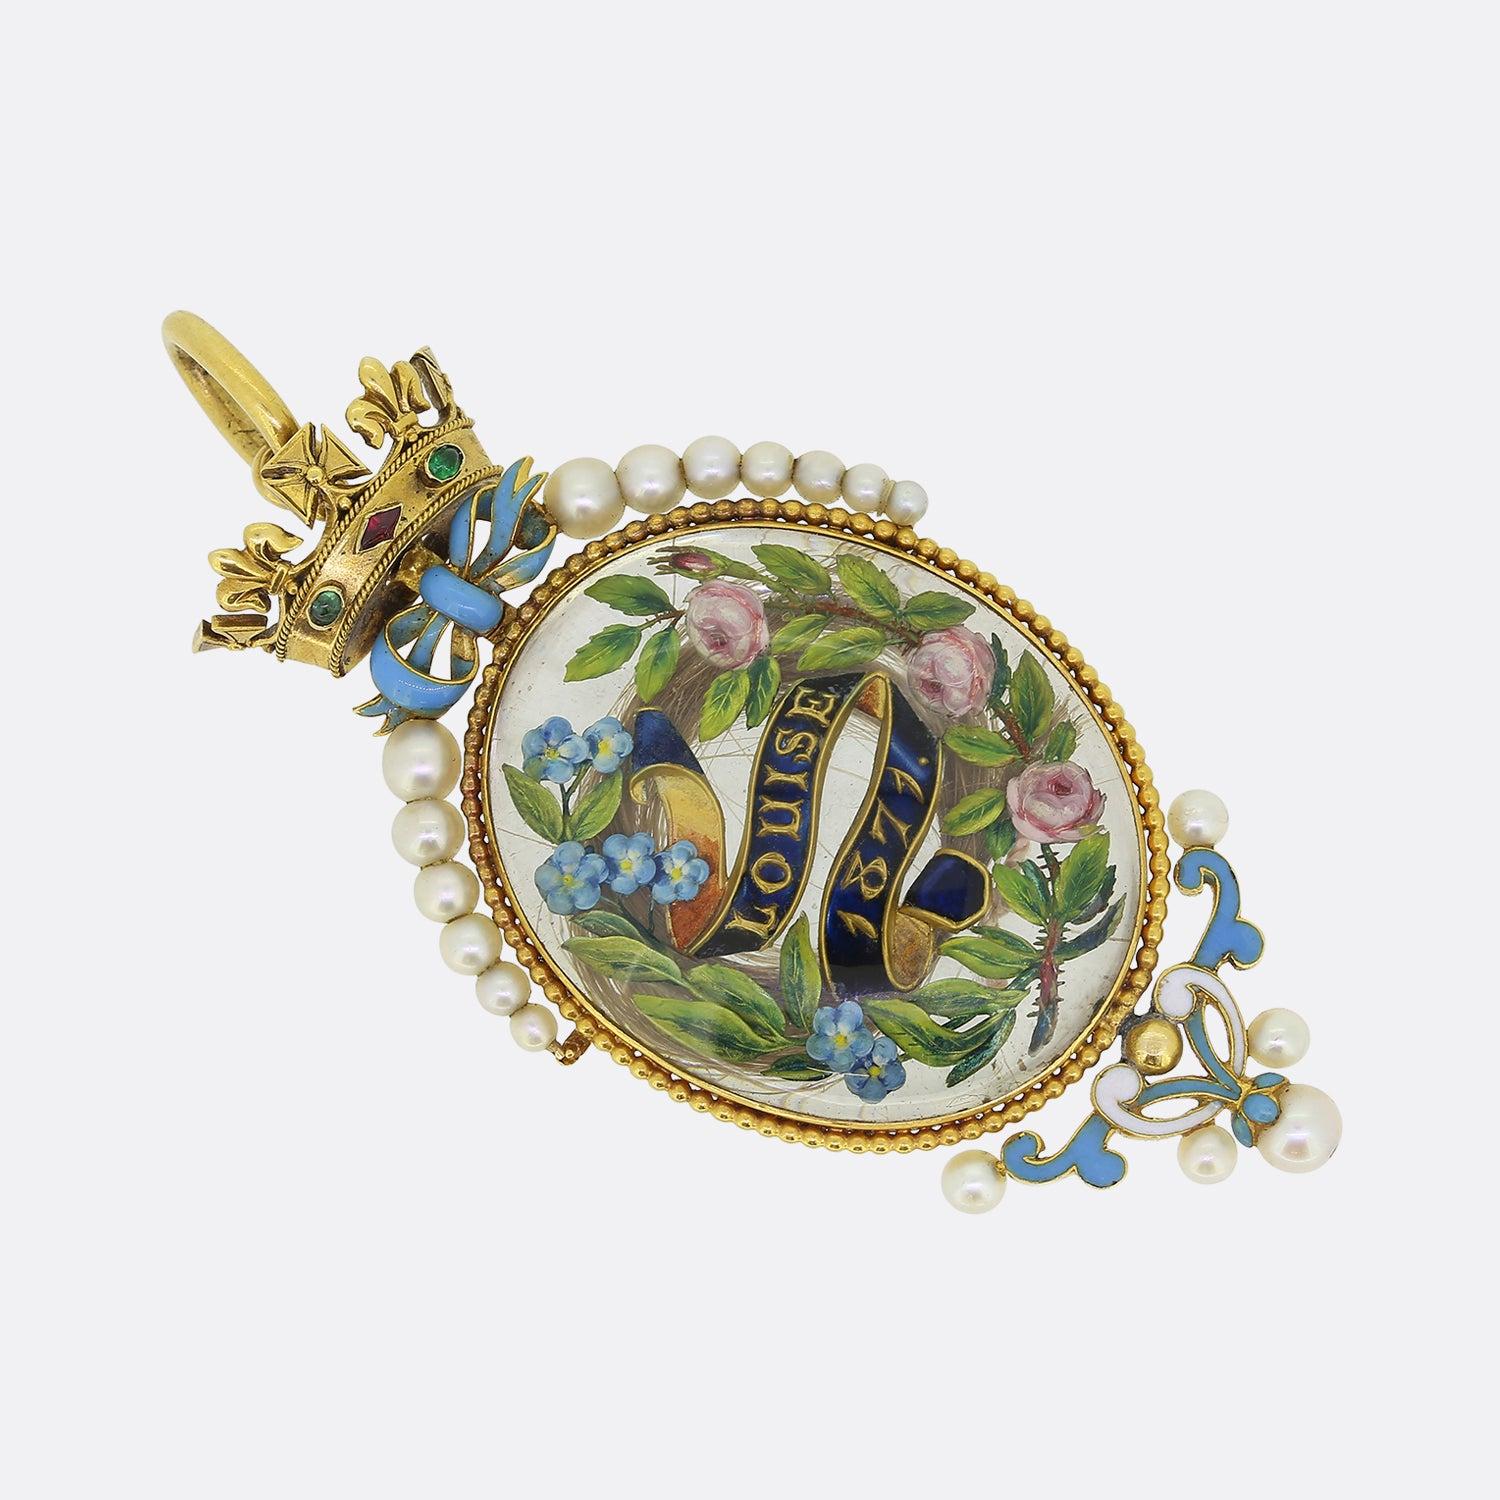 This is a truly wonderful and rare pendant dating back to the Victorian era.

The locket given by her royal highness to the bridesmaids was manufactured by London and Ryder. It's design was assisted by sketches made by the princess herself. The